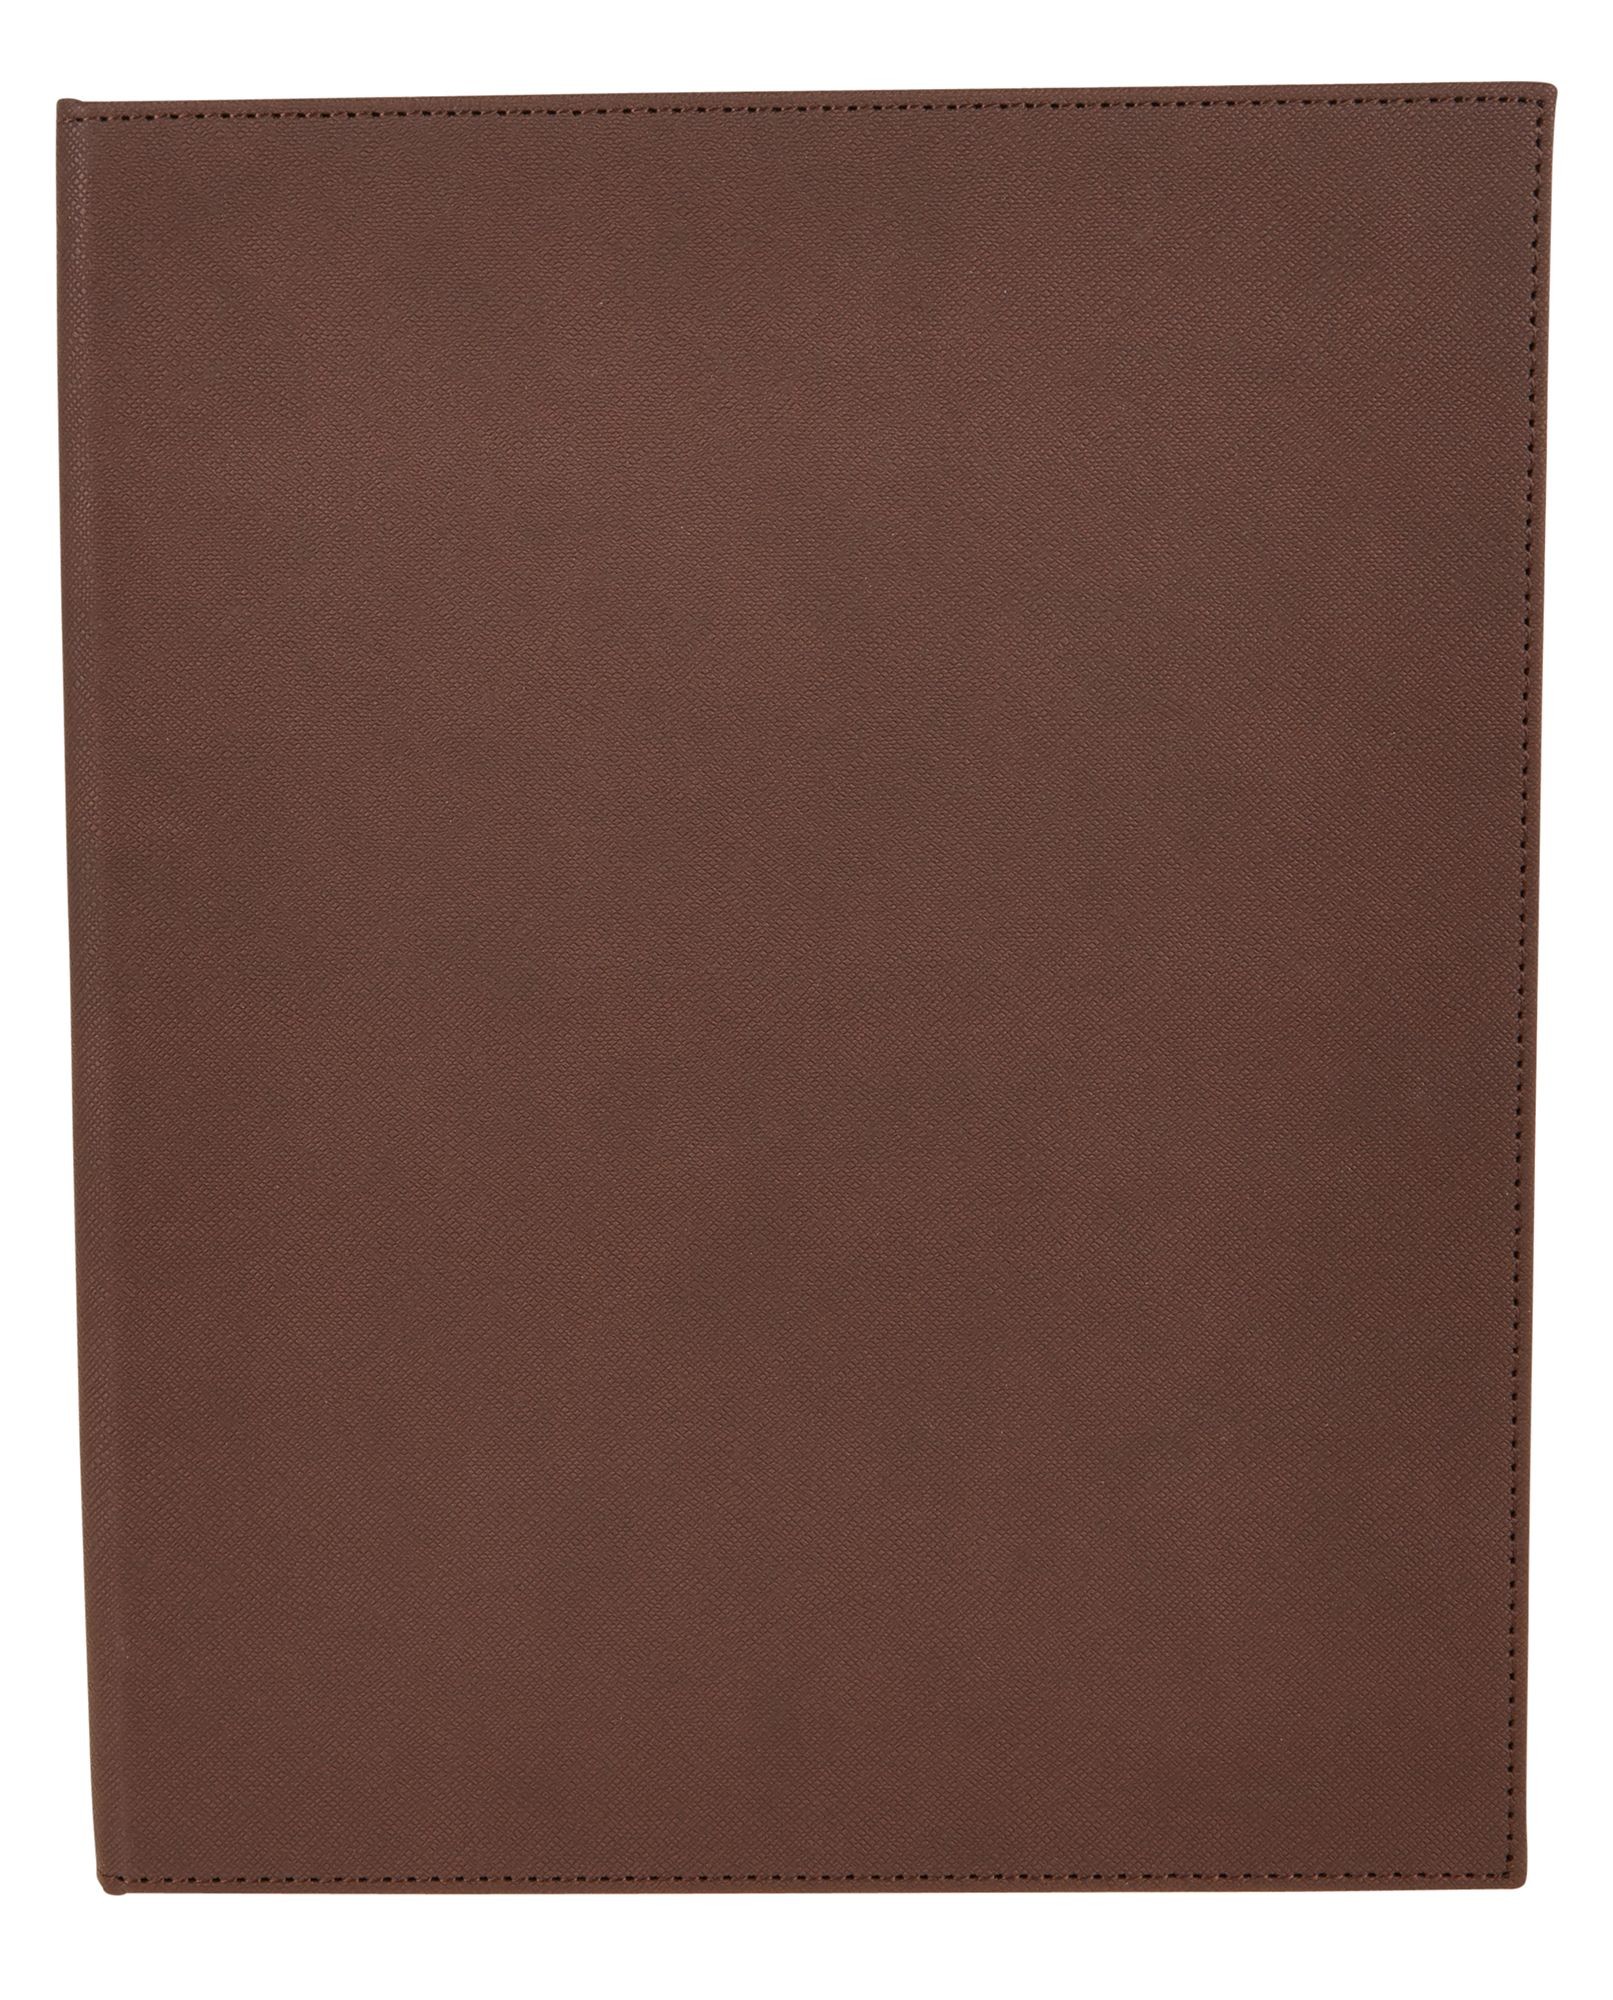 Winco LMD-811BN 8-1/2" x 11" Brown Leatherette Two Panel Menu Cover